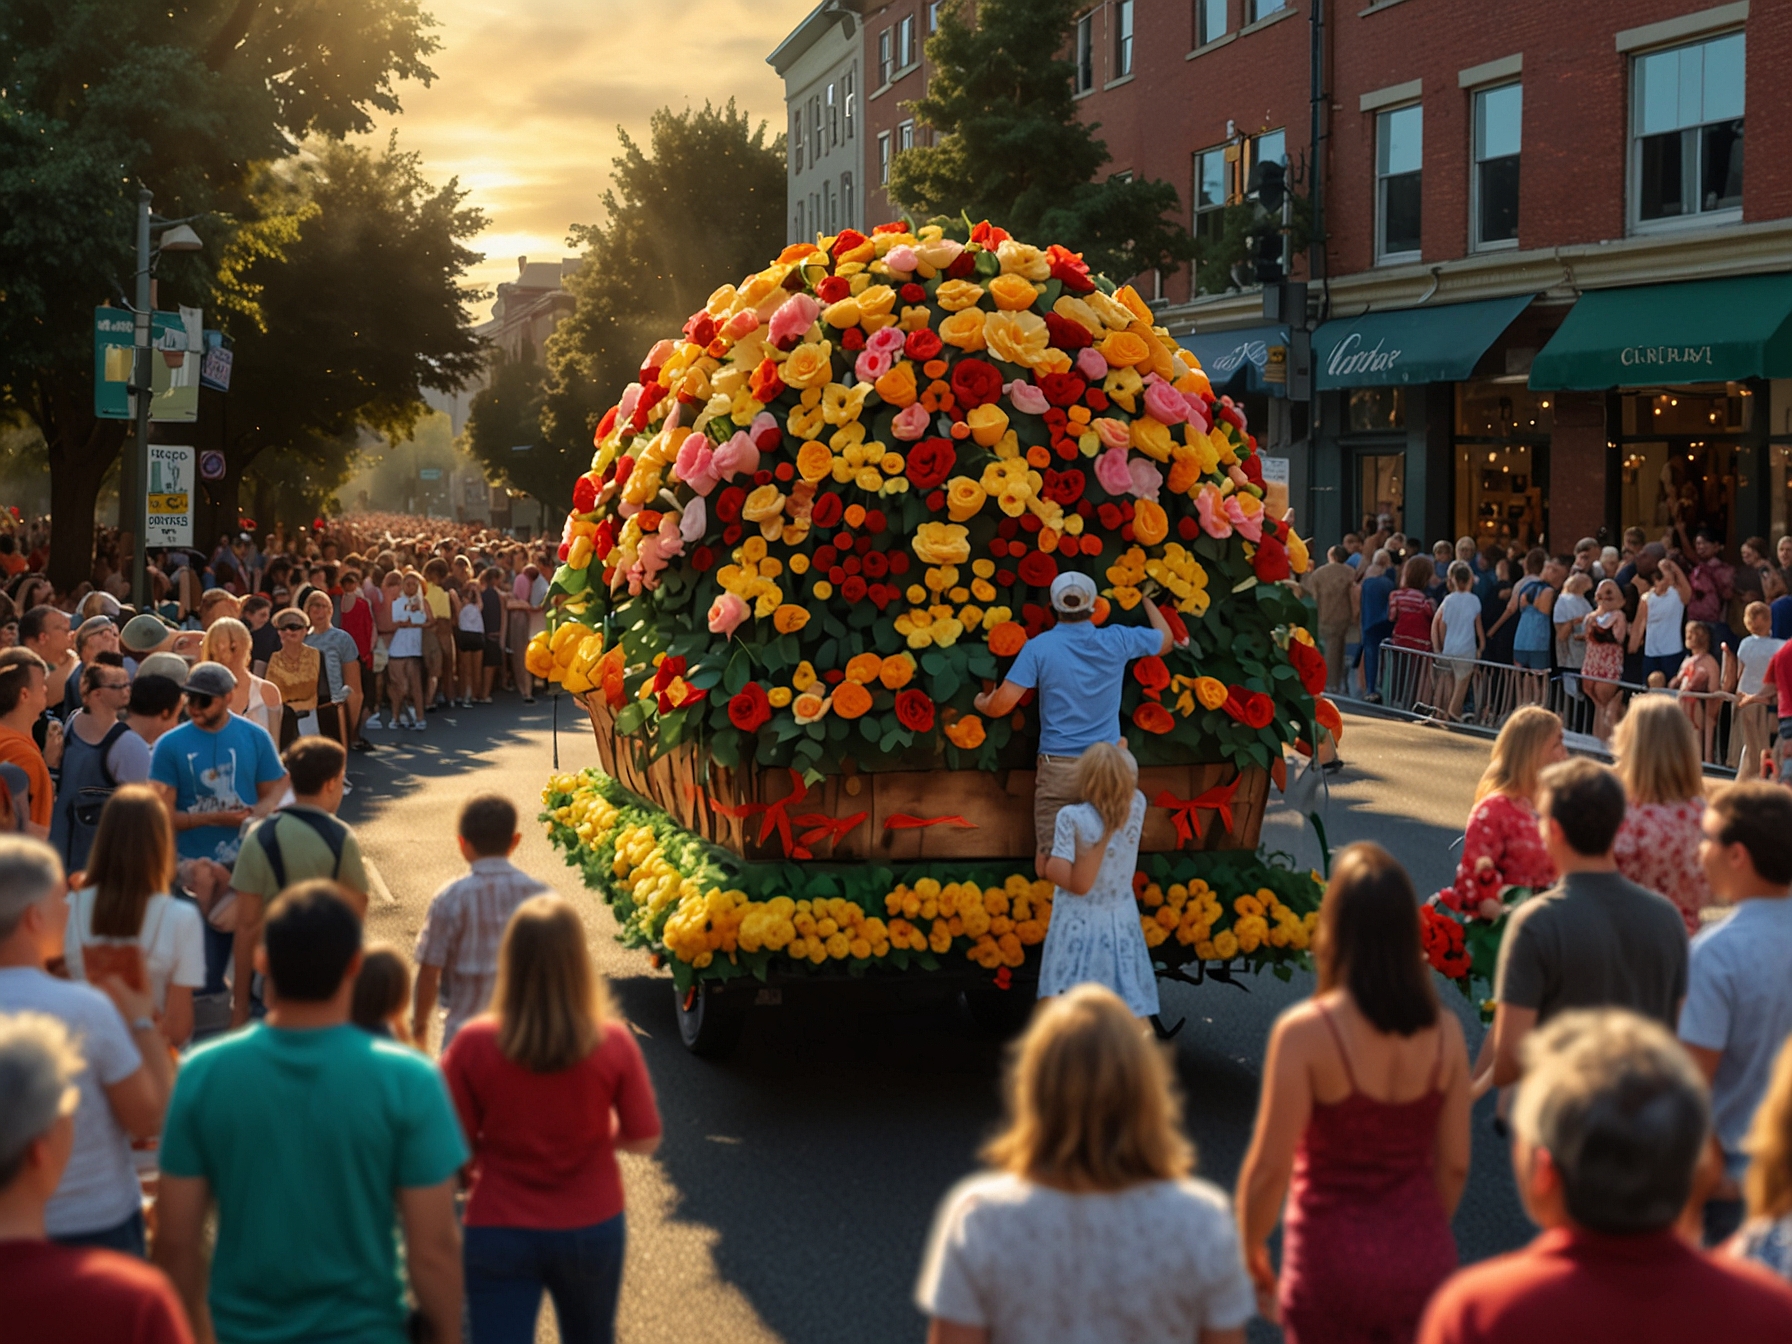 A vibrant float adorned with roses passing through a crowded street during the Grand Floral Parade at the Portland Rose Festival. Spectators cheer as the sun sets, creating a magical atmosphere.